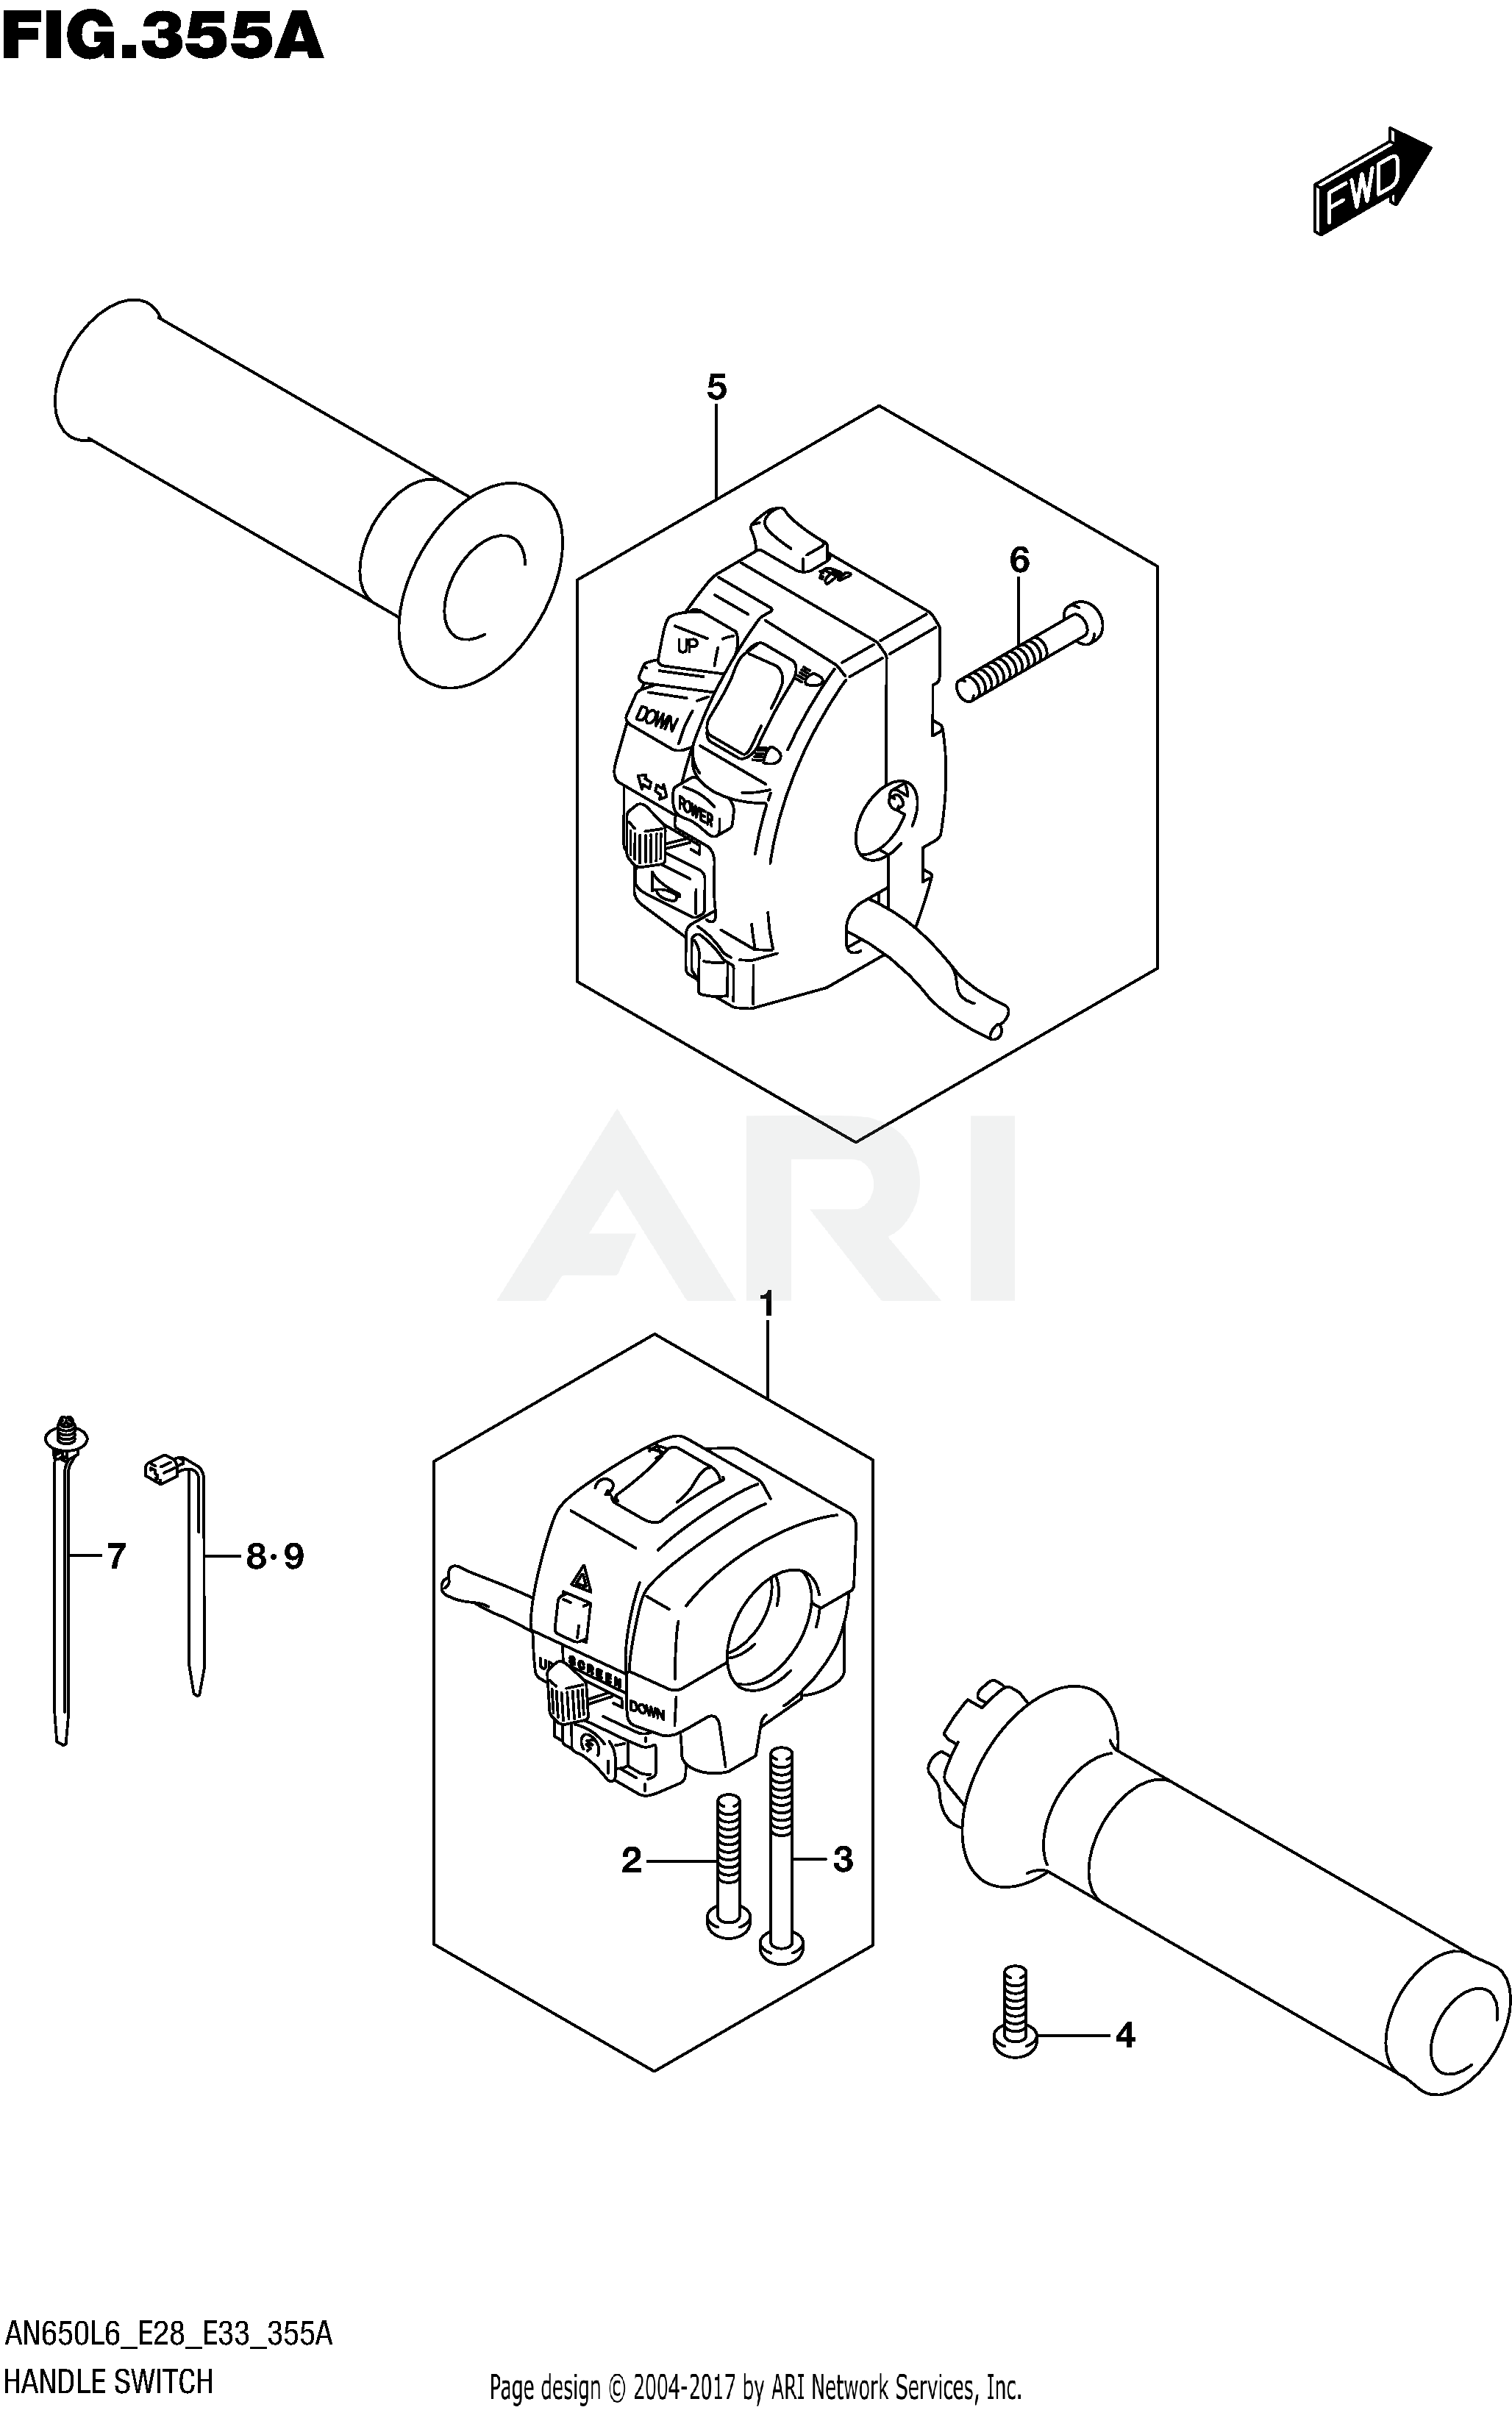 HANDLE SWITCH (AN650L6 E33)